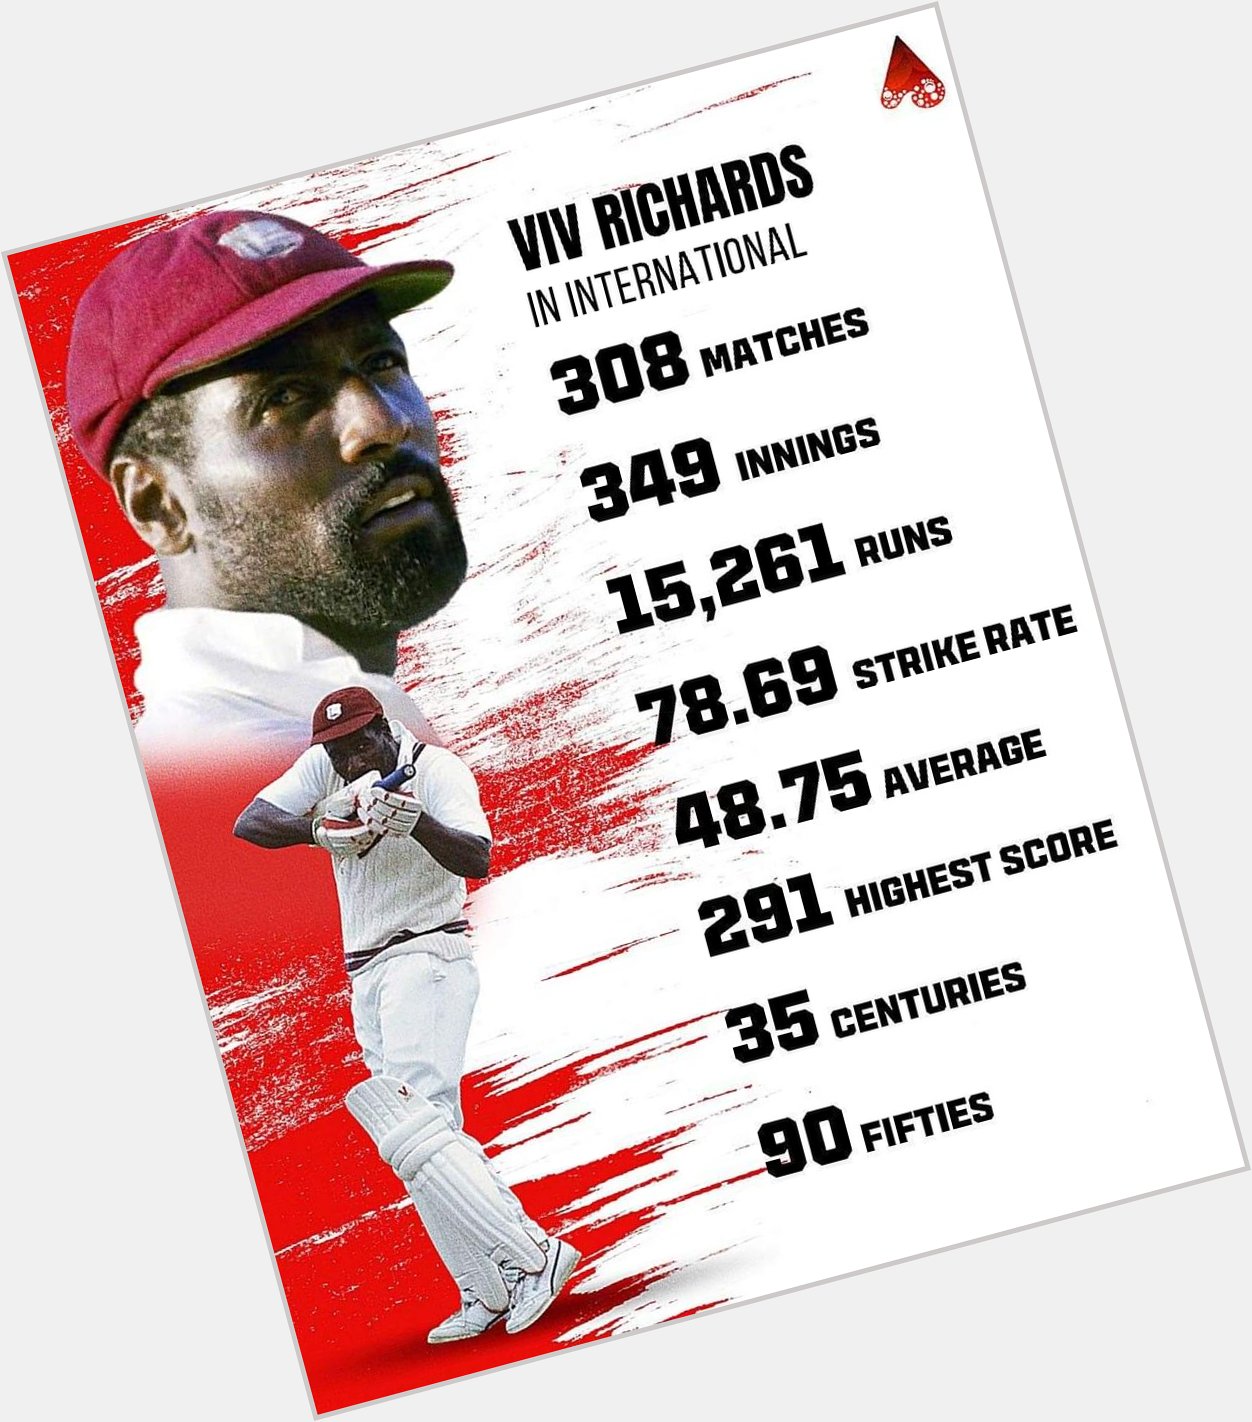 Happy 71st birthday to the most fearless and destructive batter of All Time, Sir Viv Richards    